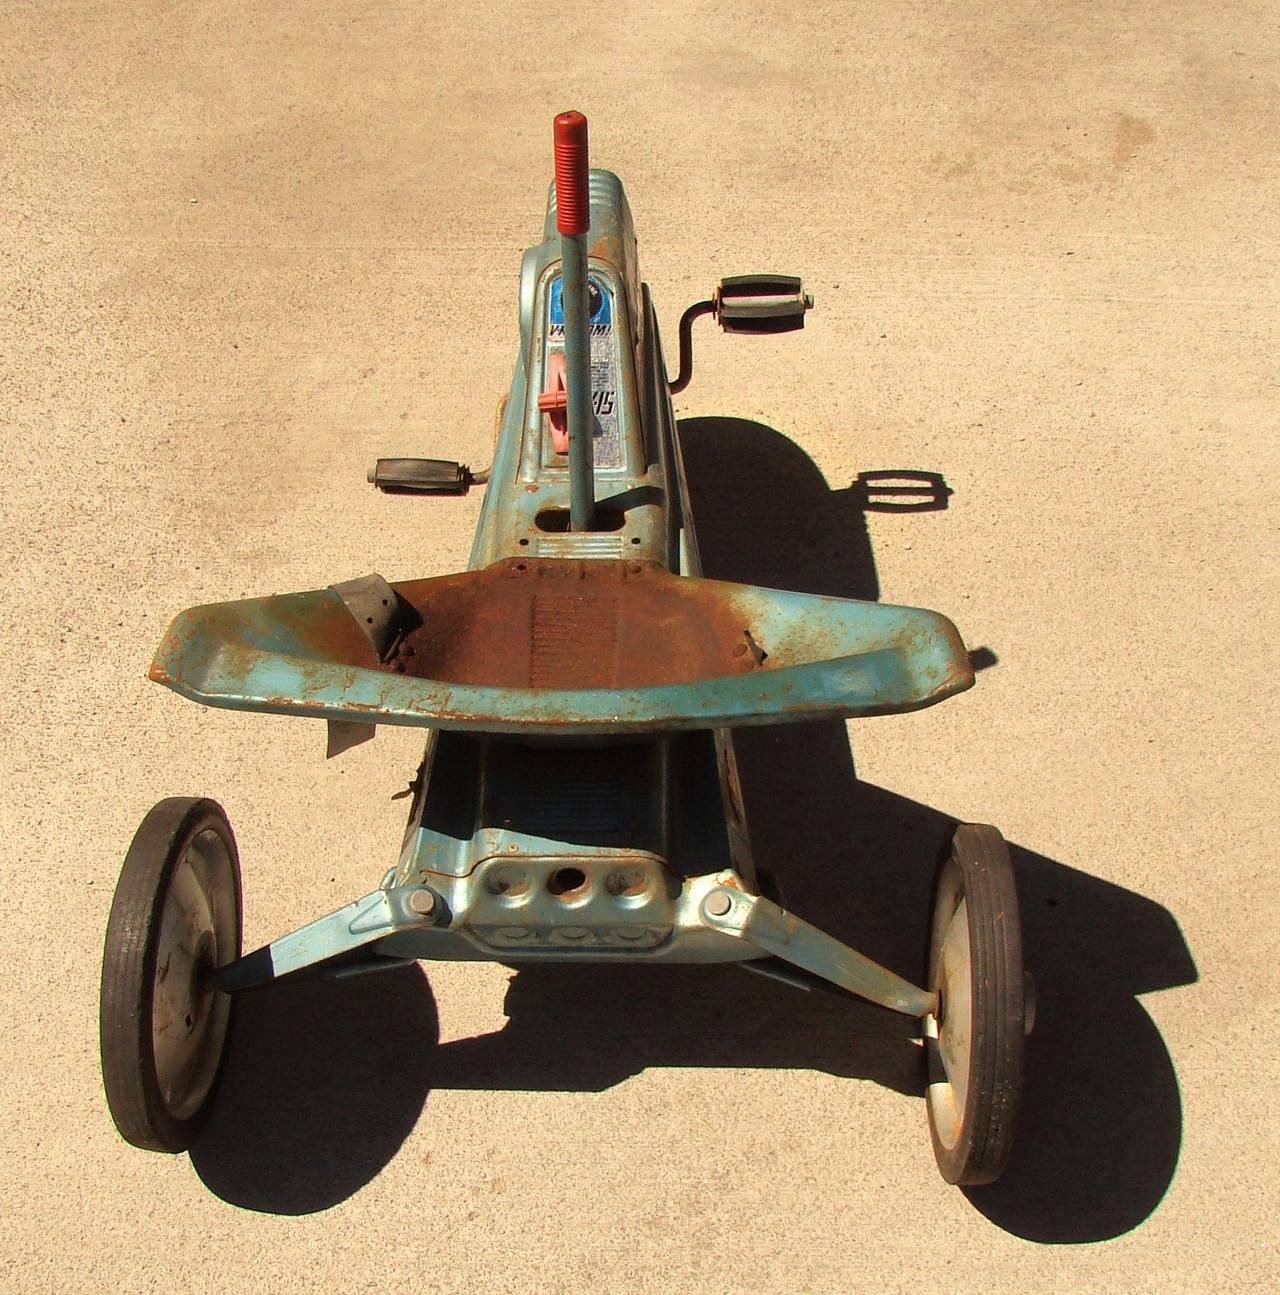 Awesome all original Mattel Vrroom pedal dated 1963. There is some wear and tear on the this little car but it has definite character. Still very much operable or a great piece for display. Retains the original Mattel sticker on the front and 2